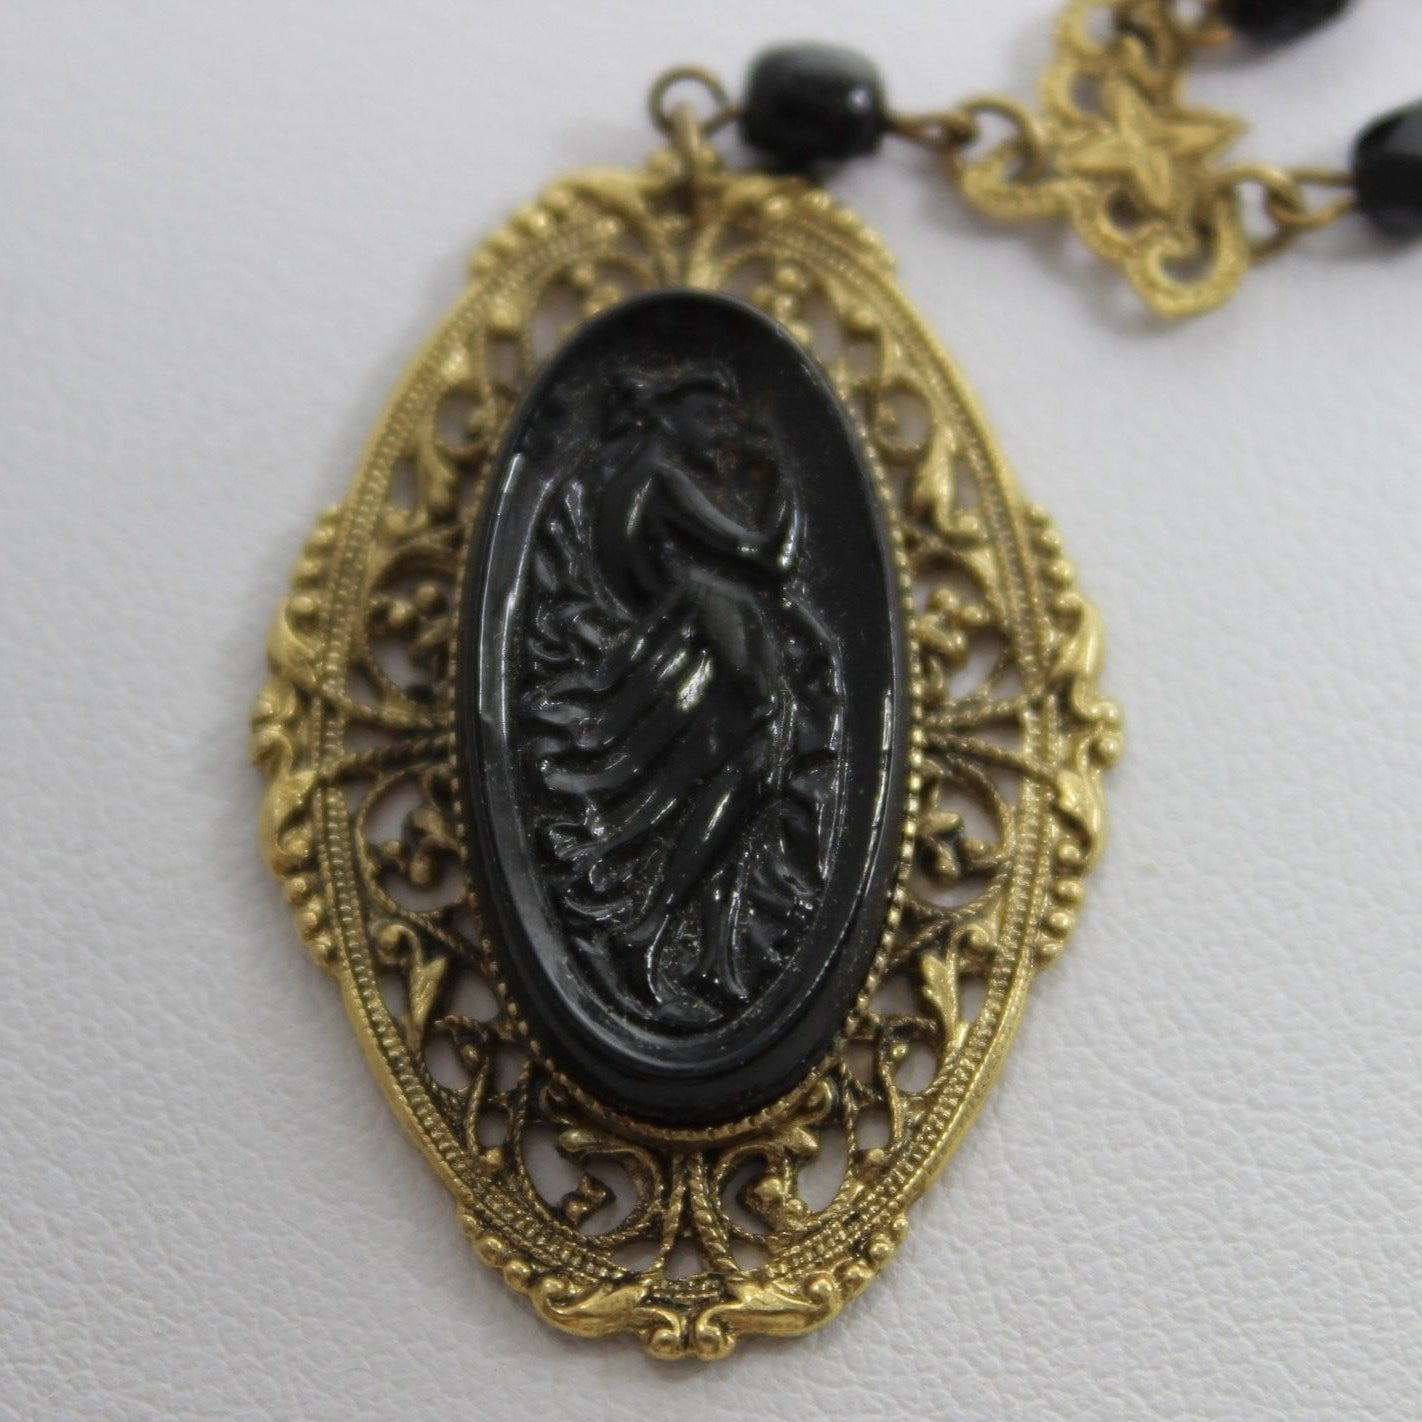 Filigree Pendant Necklace "1928" Maker Victorian Woman Carved dimensional